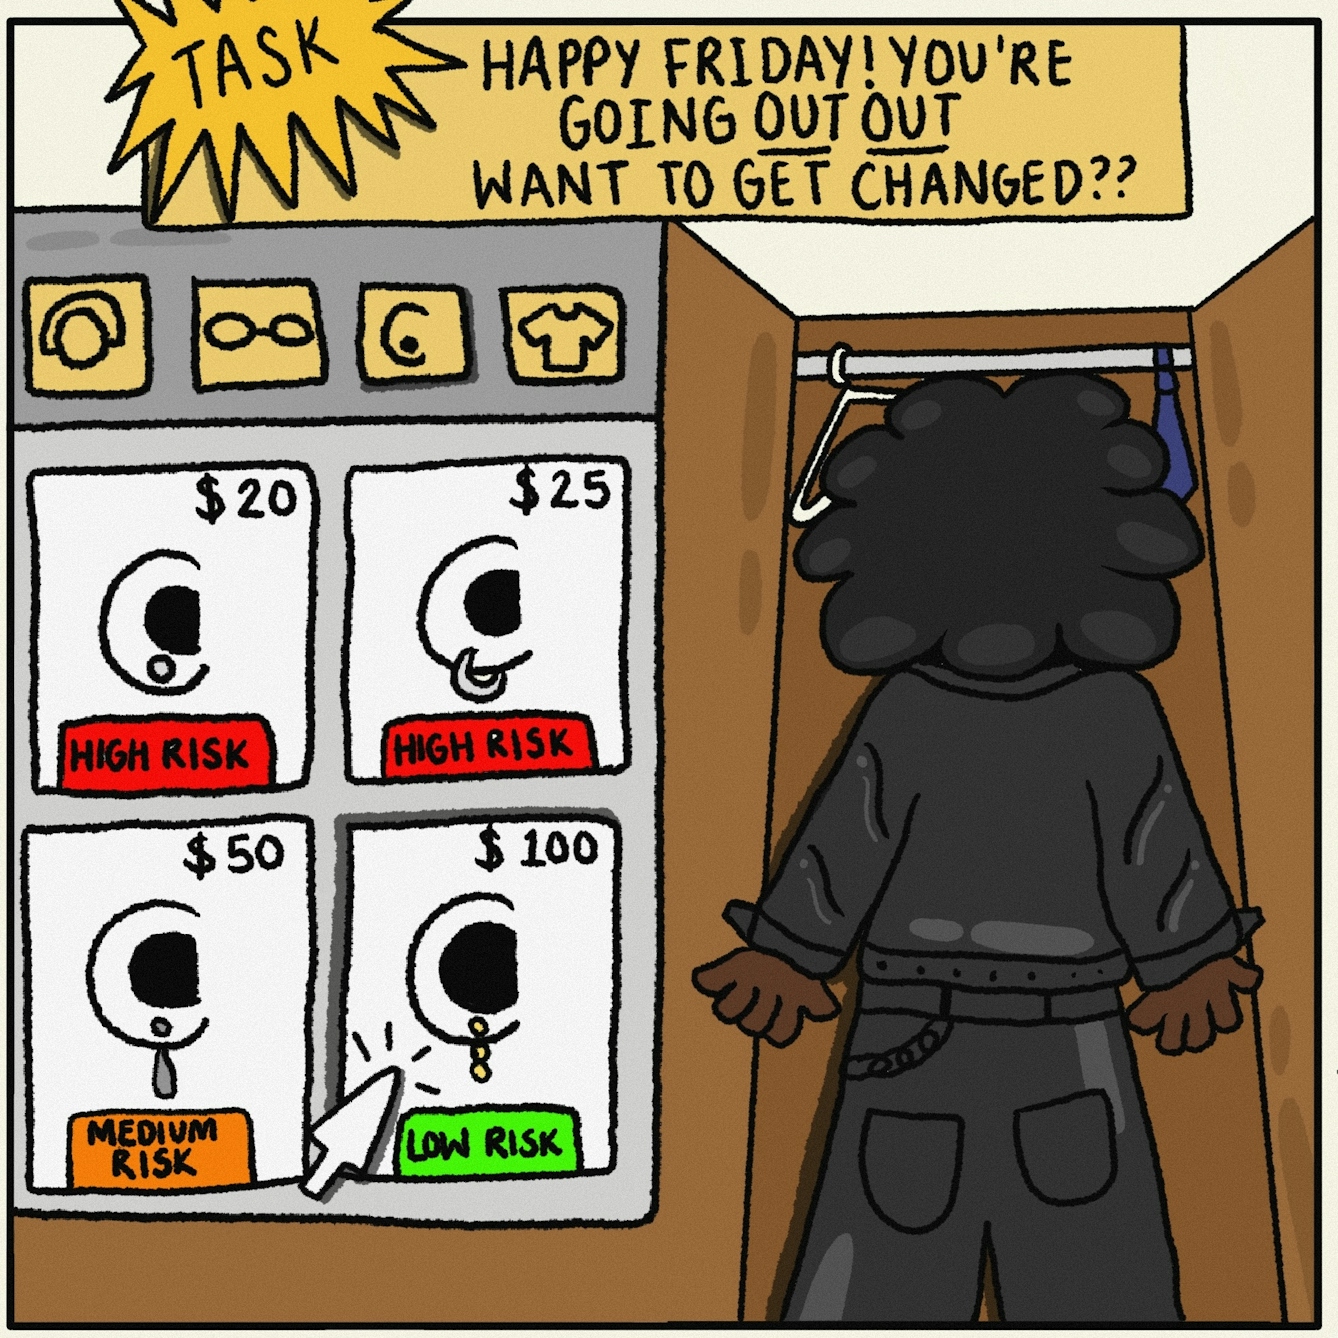 Panel 3 of a digitally drawn, four-panel comic titled ‘Winning’. Your player has a task. It reads: “Happy Friday! You’re going OUT OUT. Want to get changed?”. Looking in your wardrobe, you have the option to buy some earrings. The first three pairs of earrings are cheaper and higher risk. The cursor shows you’re about to choose the final pair, which are the lowest risk but most expensive. 